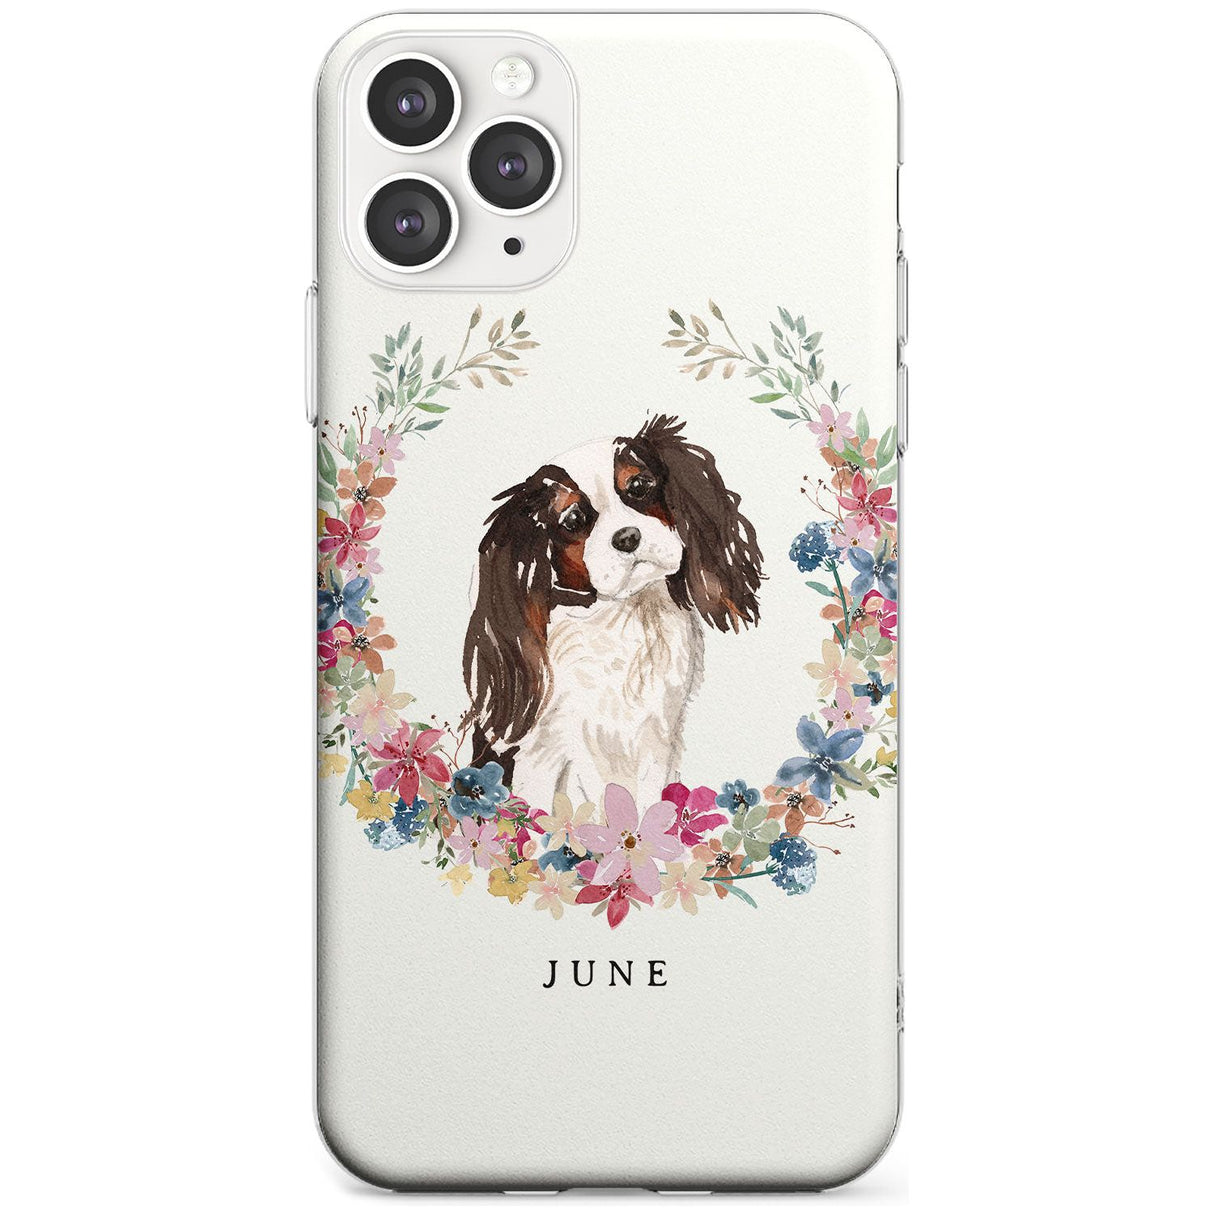 Tri Coloured King Charles Watercolour Dog Portrait Slim TPU Phone Case for iPhone 11 Pro Max